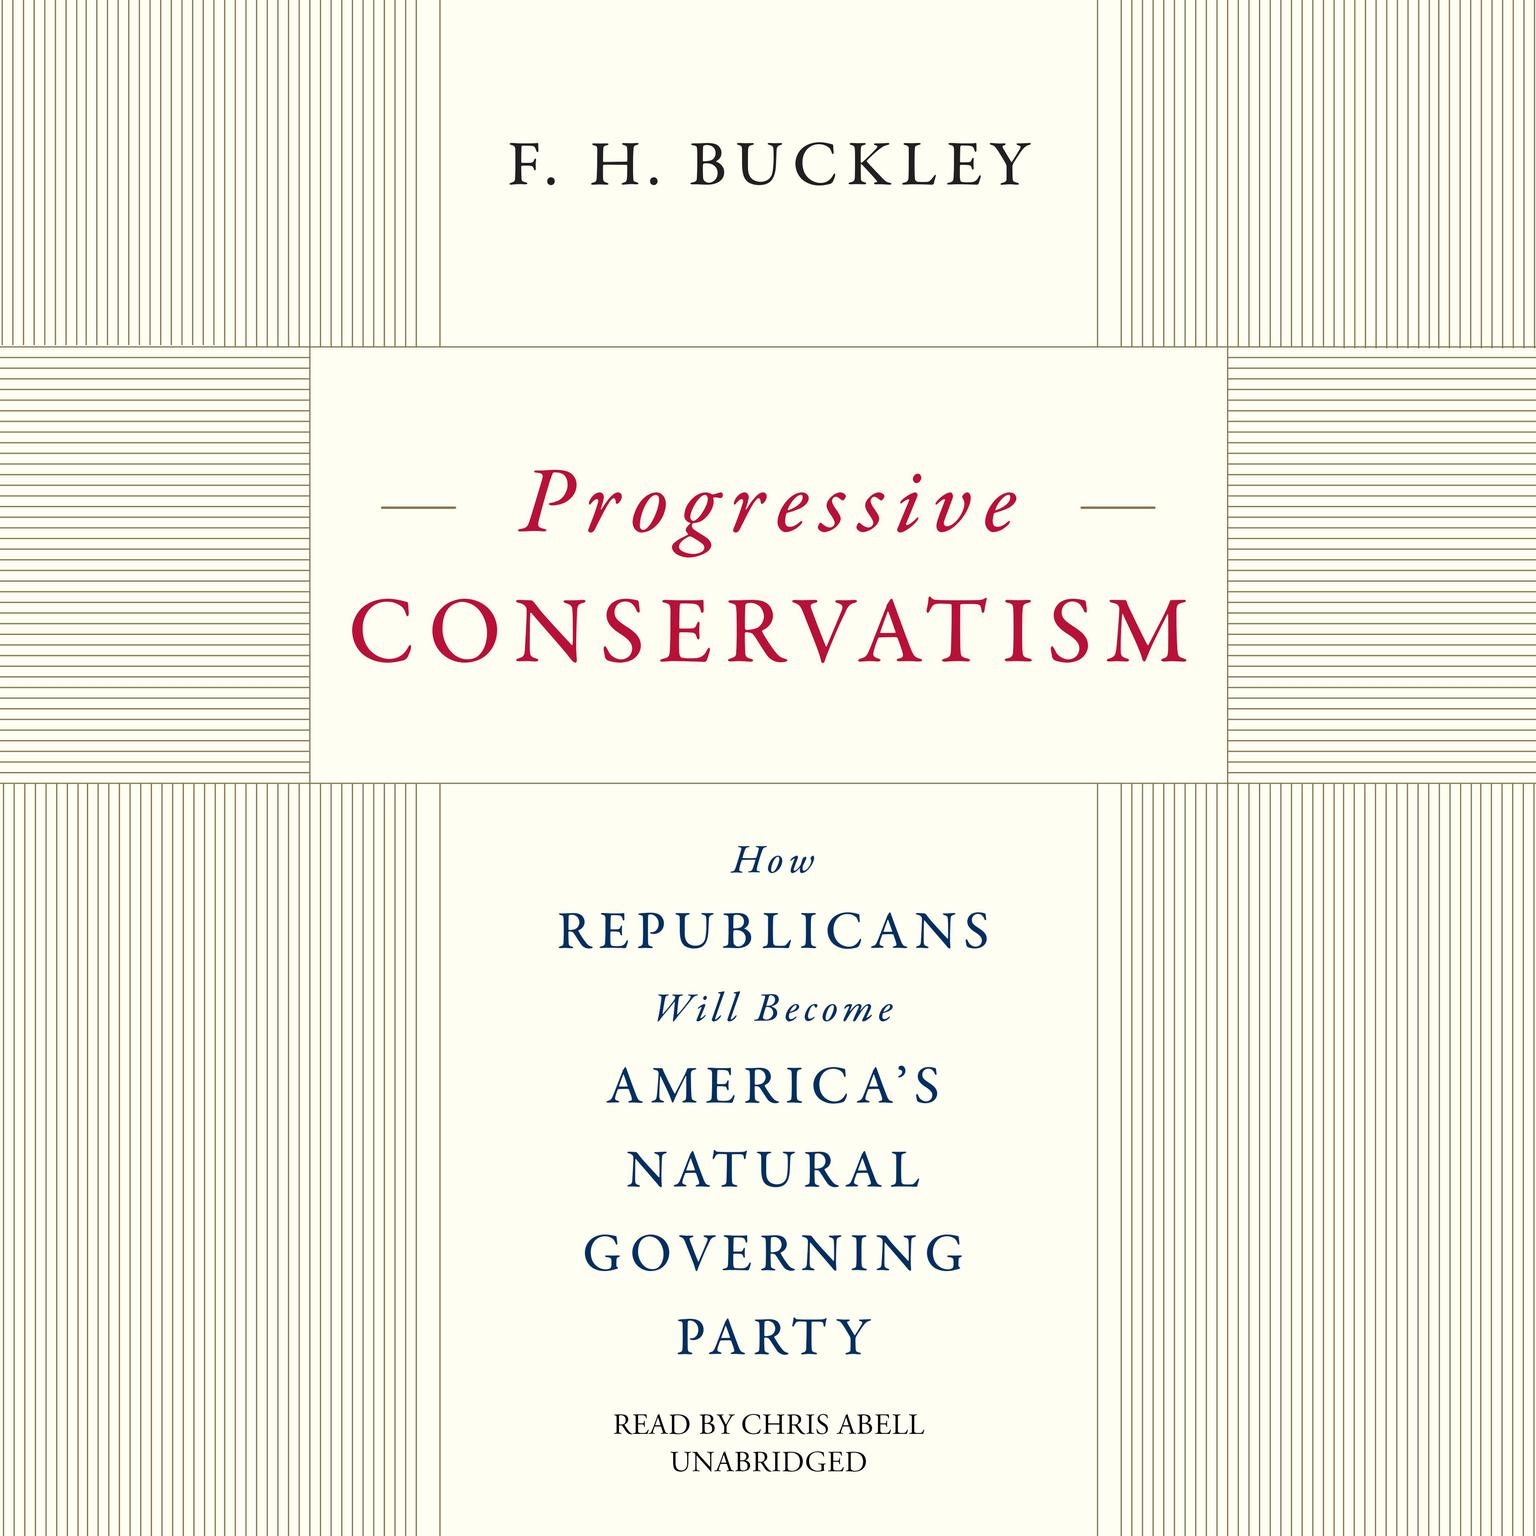 Progressive Conservatism: How Republicans Will Become Americas Natural Governing Party Audiobook, by F. H. Buckley